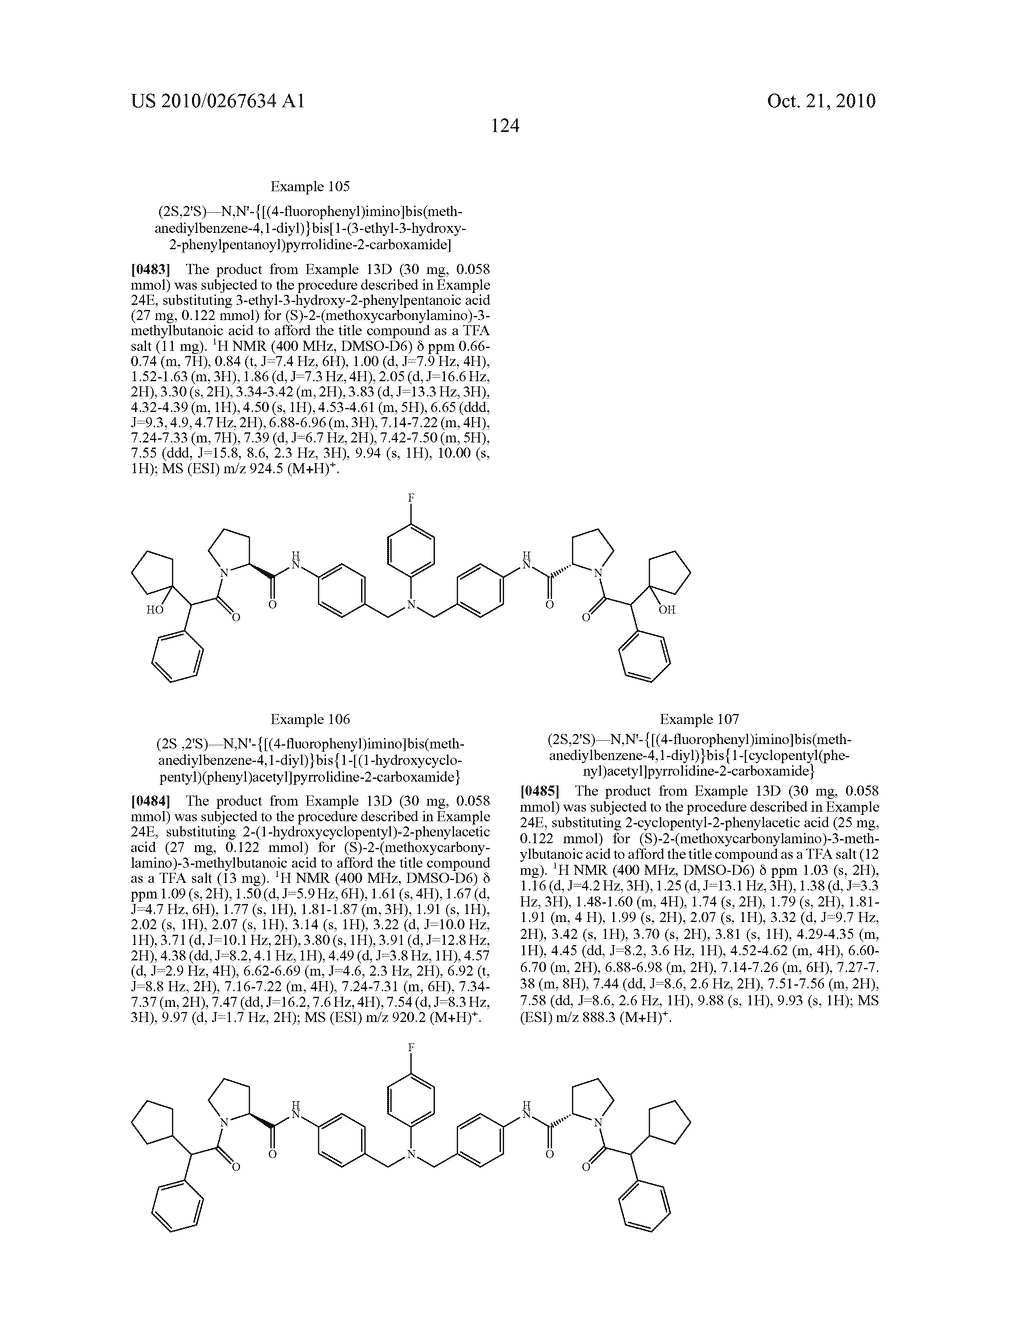 Anti-Viral Compounds - diagram, schematic, and image 125